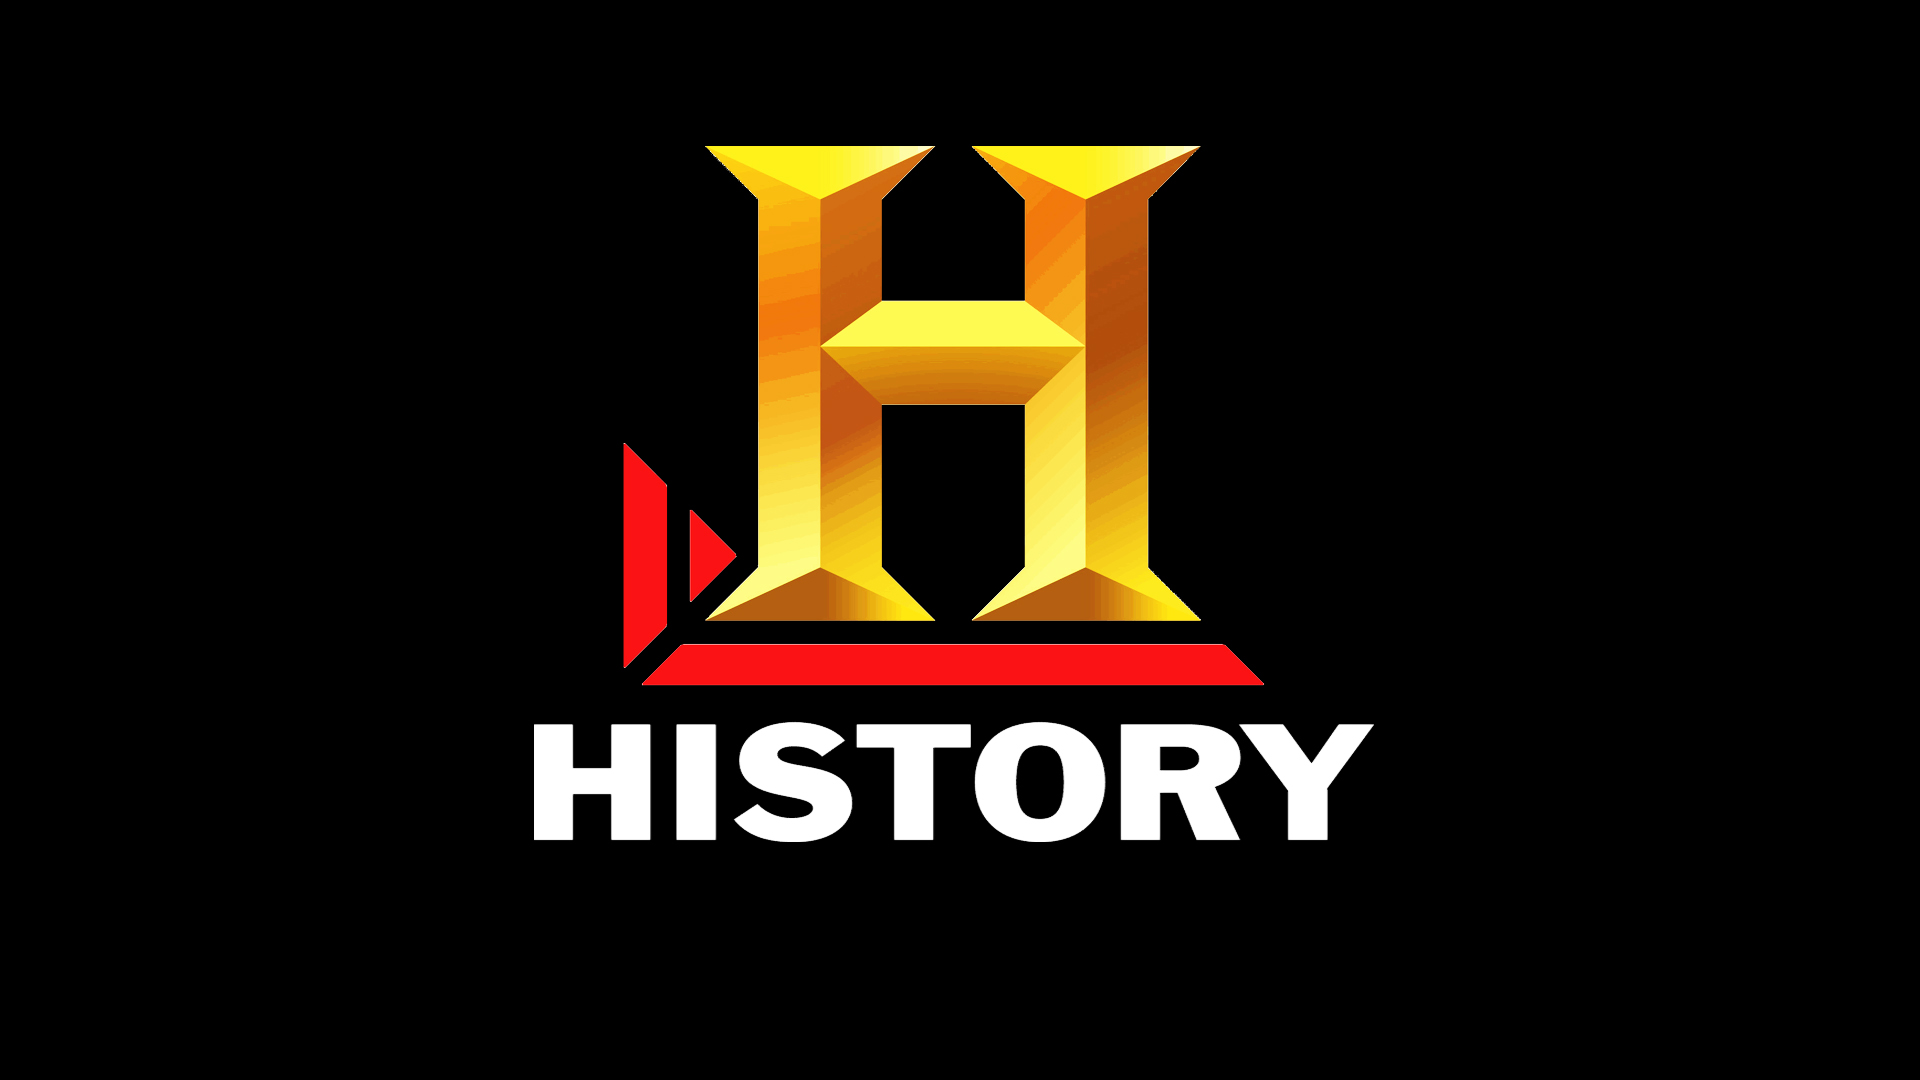 The History Channel Black logo wallpaper background